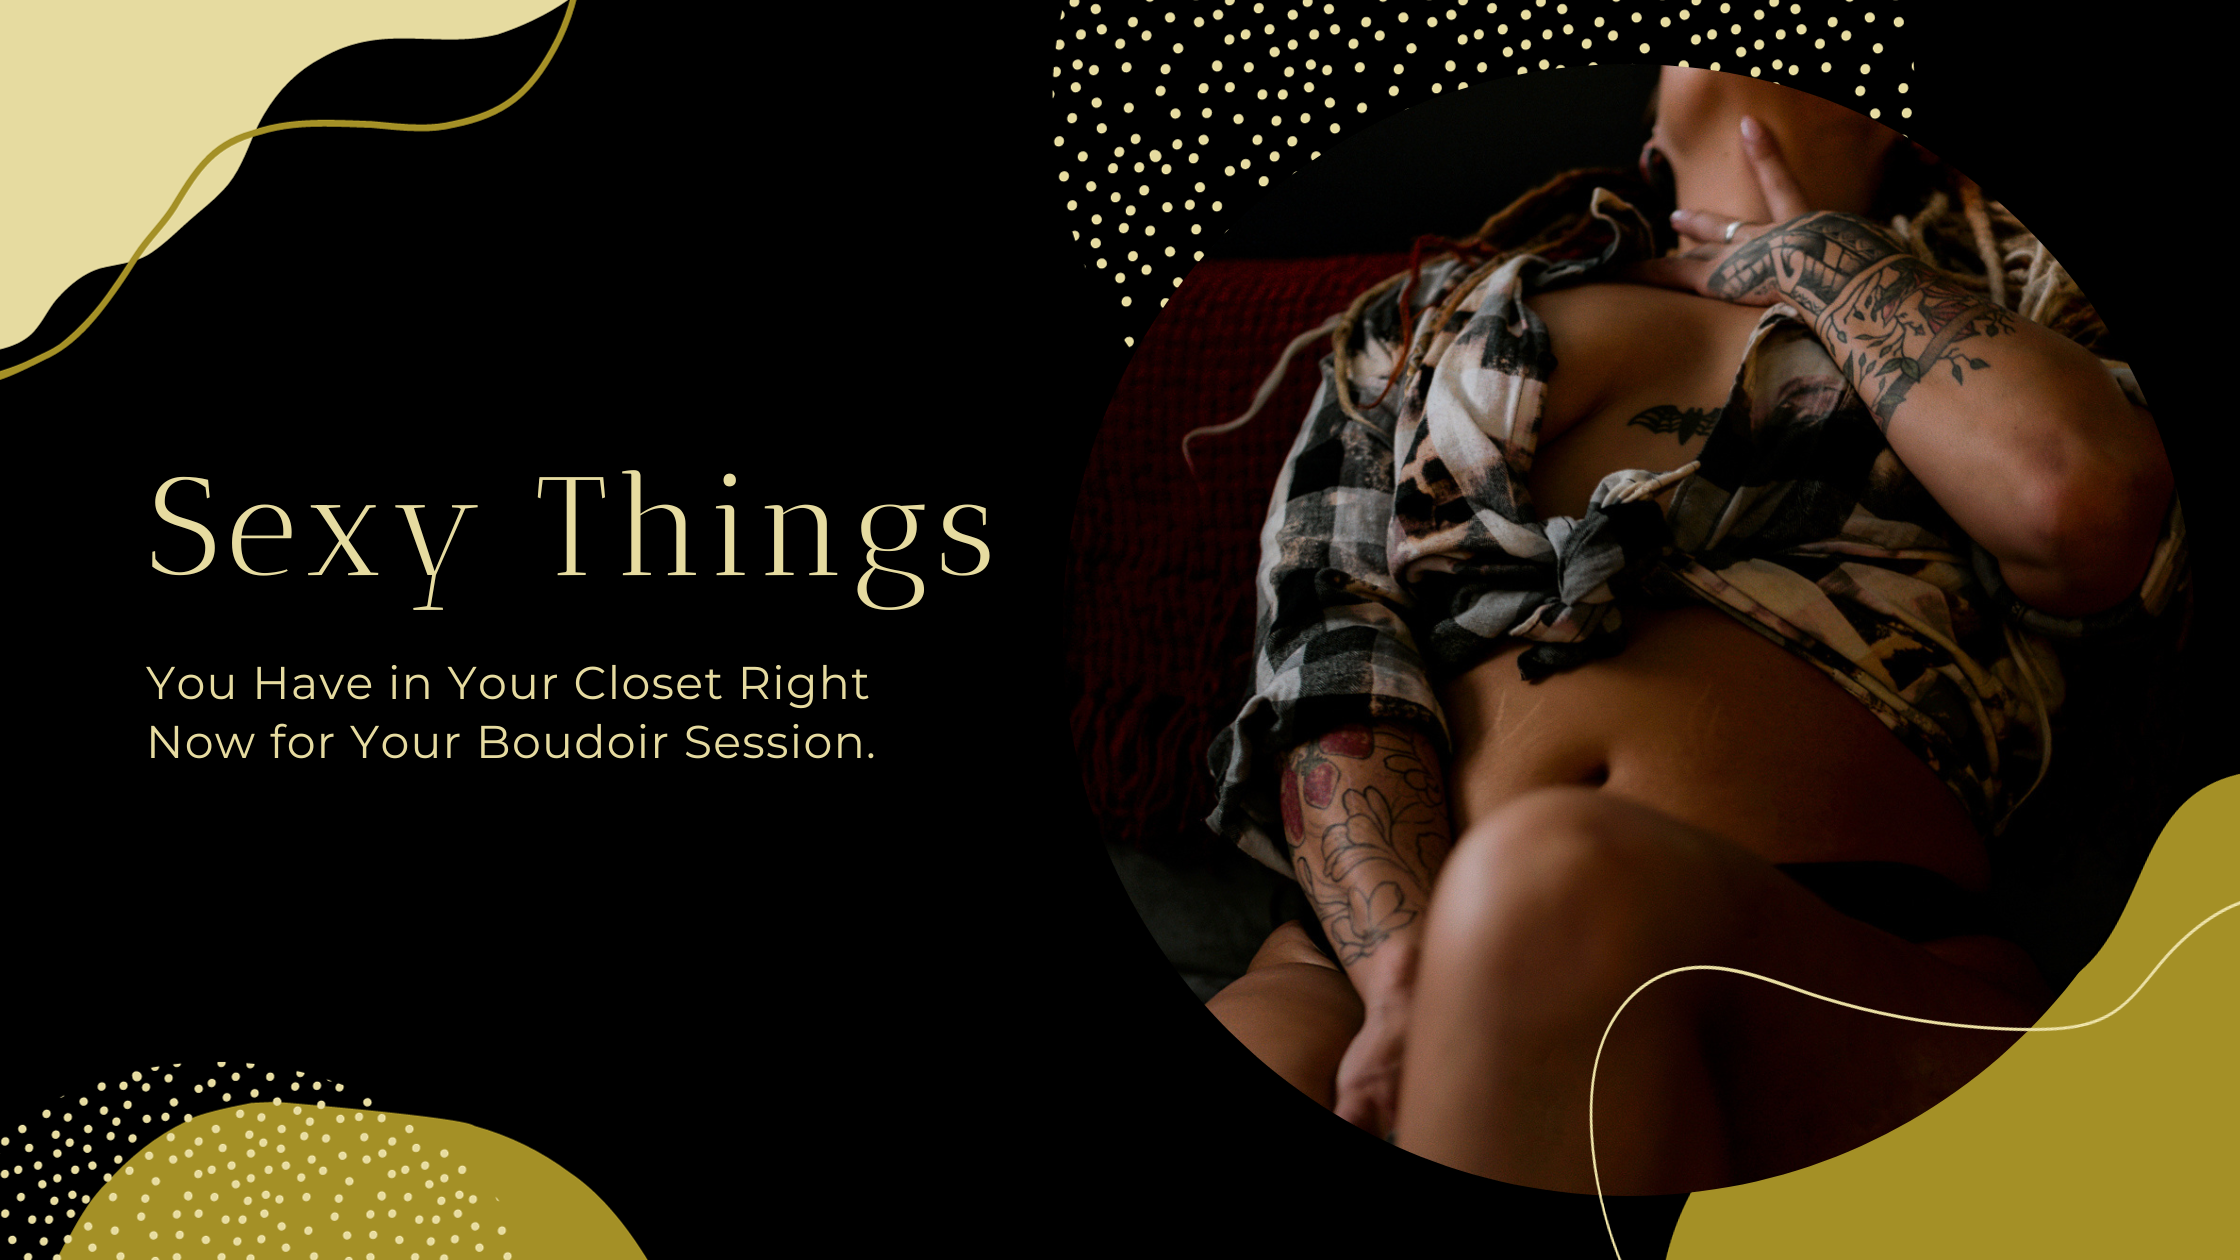 Boudoir photography, embracing vulnerability, self-love, authenticity, inner strength.Courage, self-acceptance, boudoir photographer, empowerment.